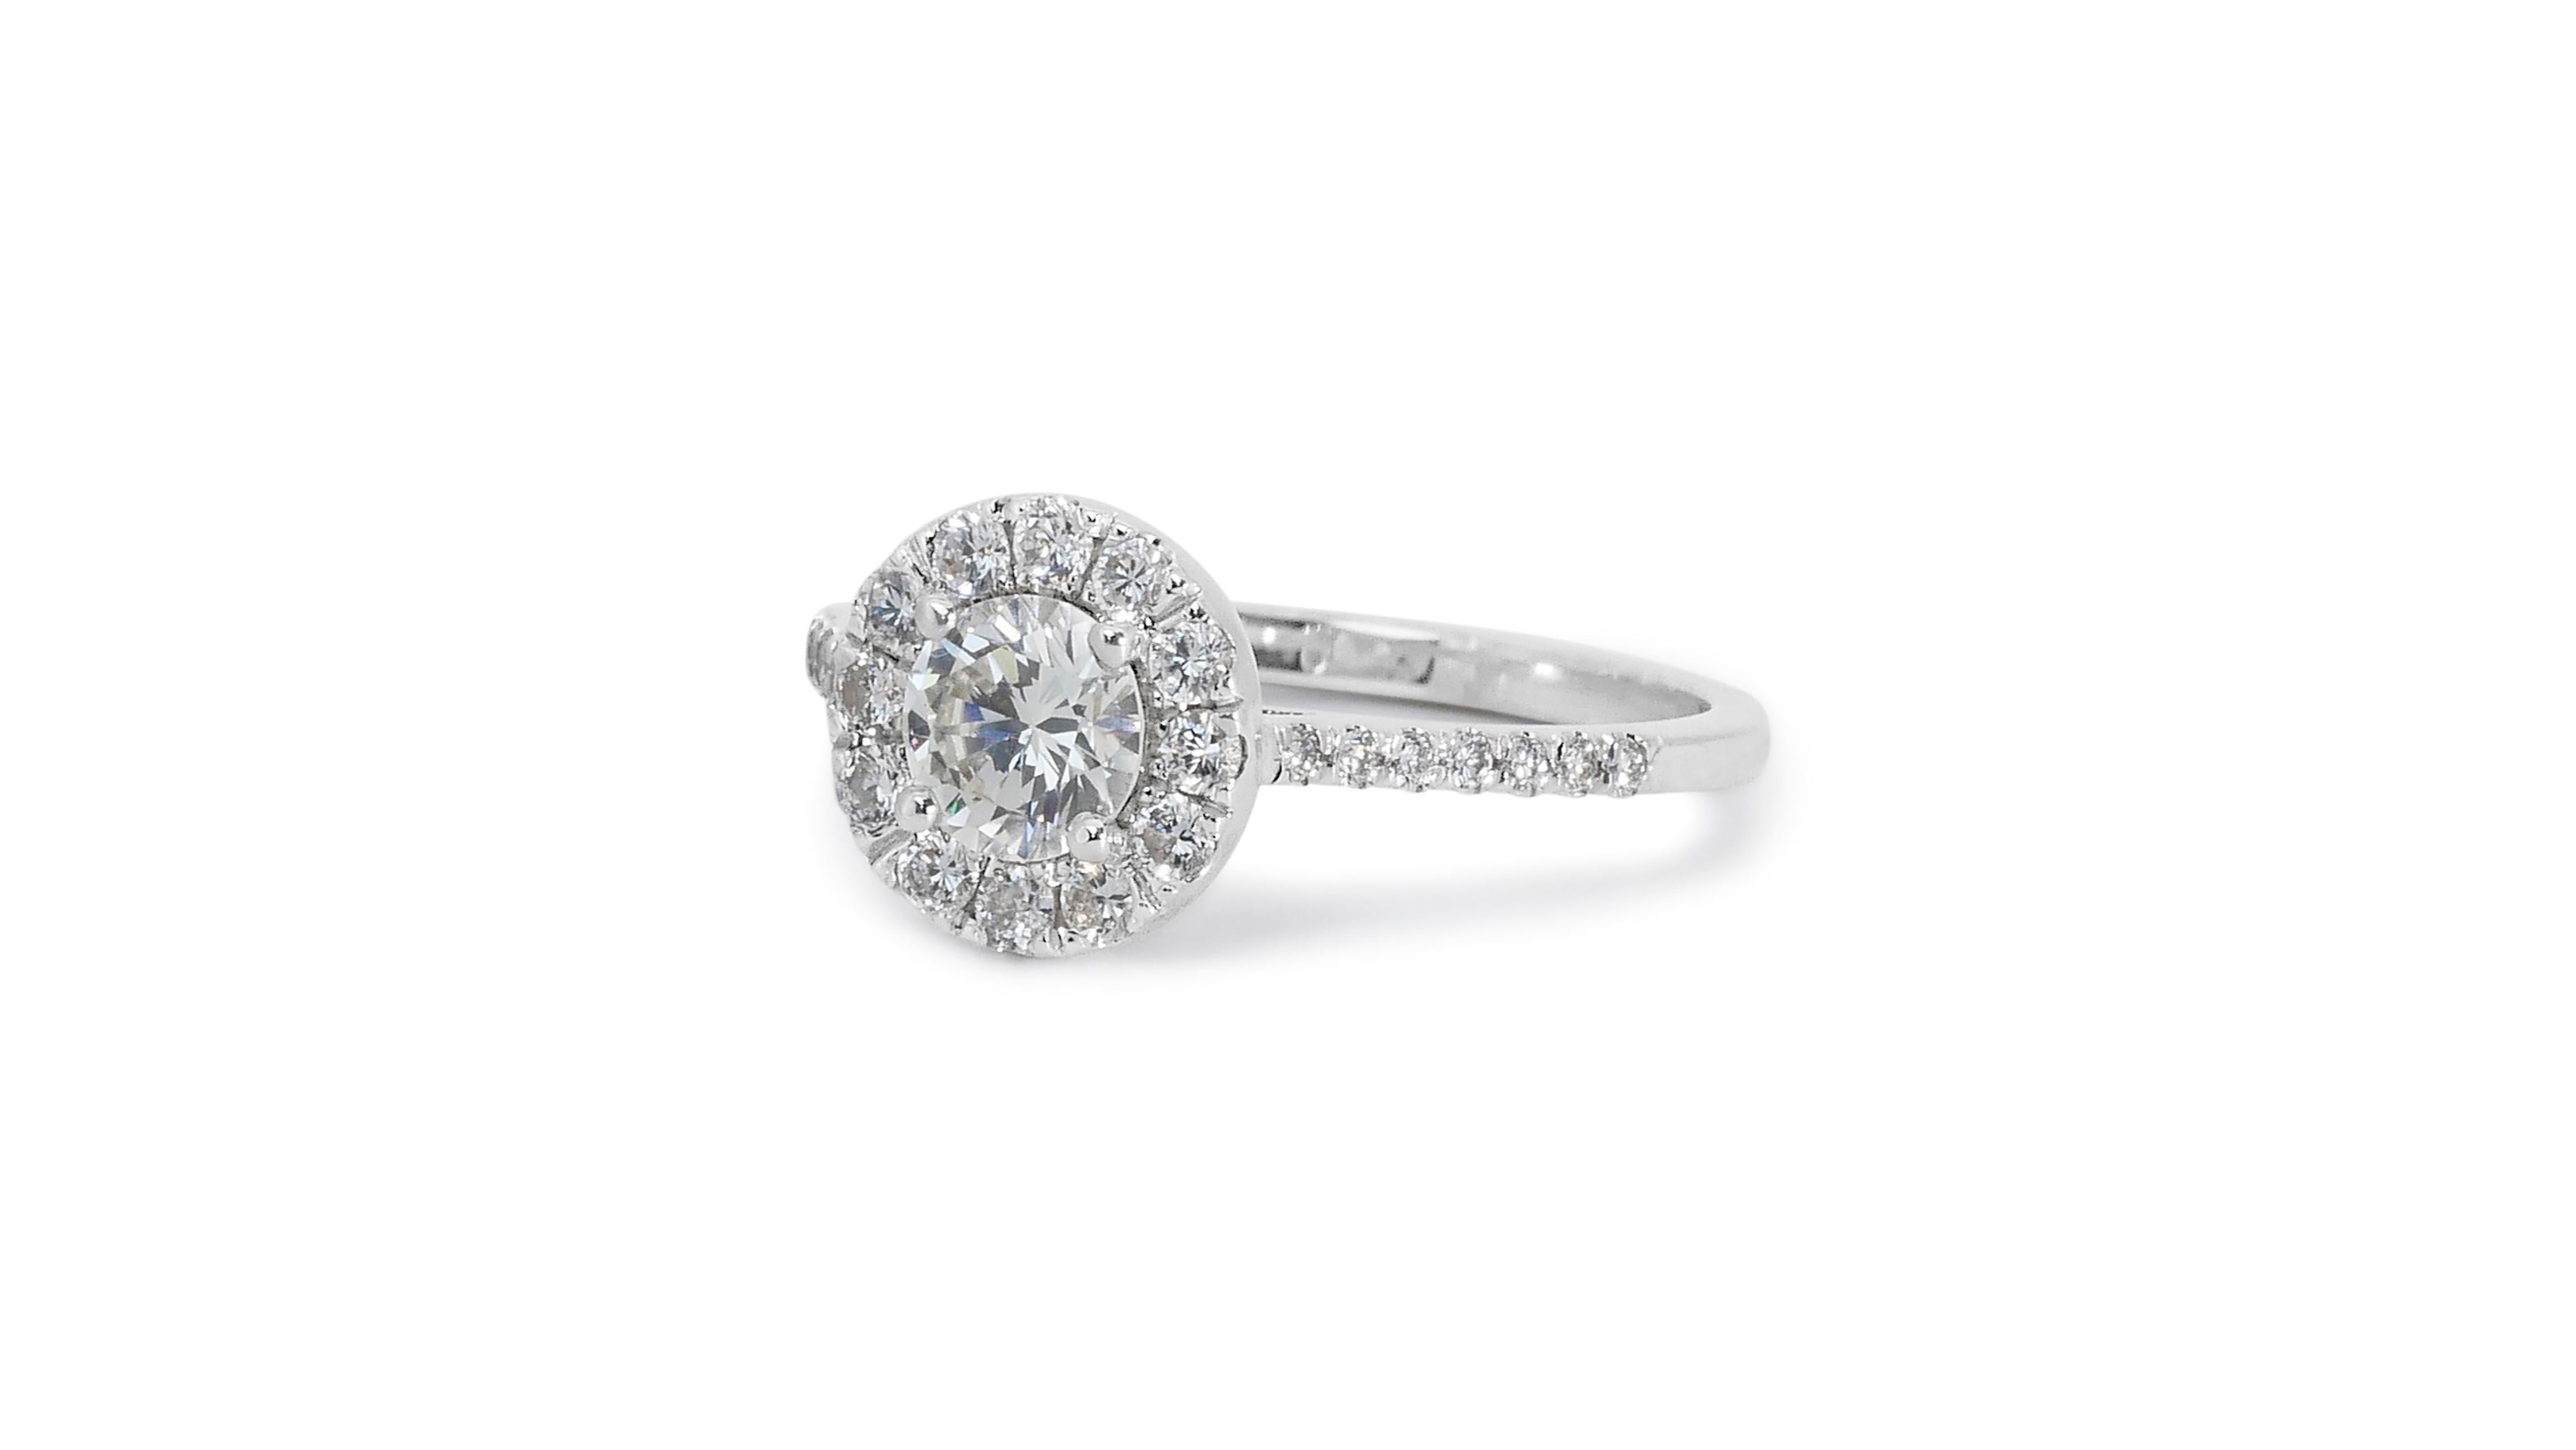 Stunning 1.35ct Diamond Halo Ring in 18k White Gold - GIA Certified

This dazzling diamond halo ring exudes timeless elegance, featuring a captivating 1.05-carat round brilliant diamond at its center. Surrounding the main stone, are 26 finely cut